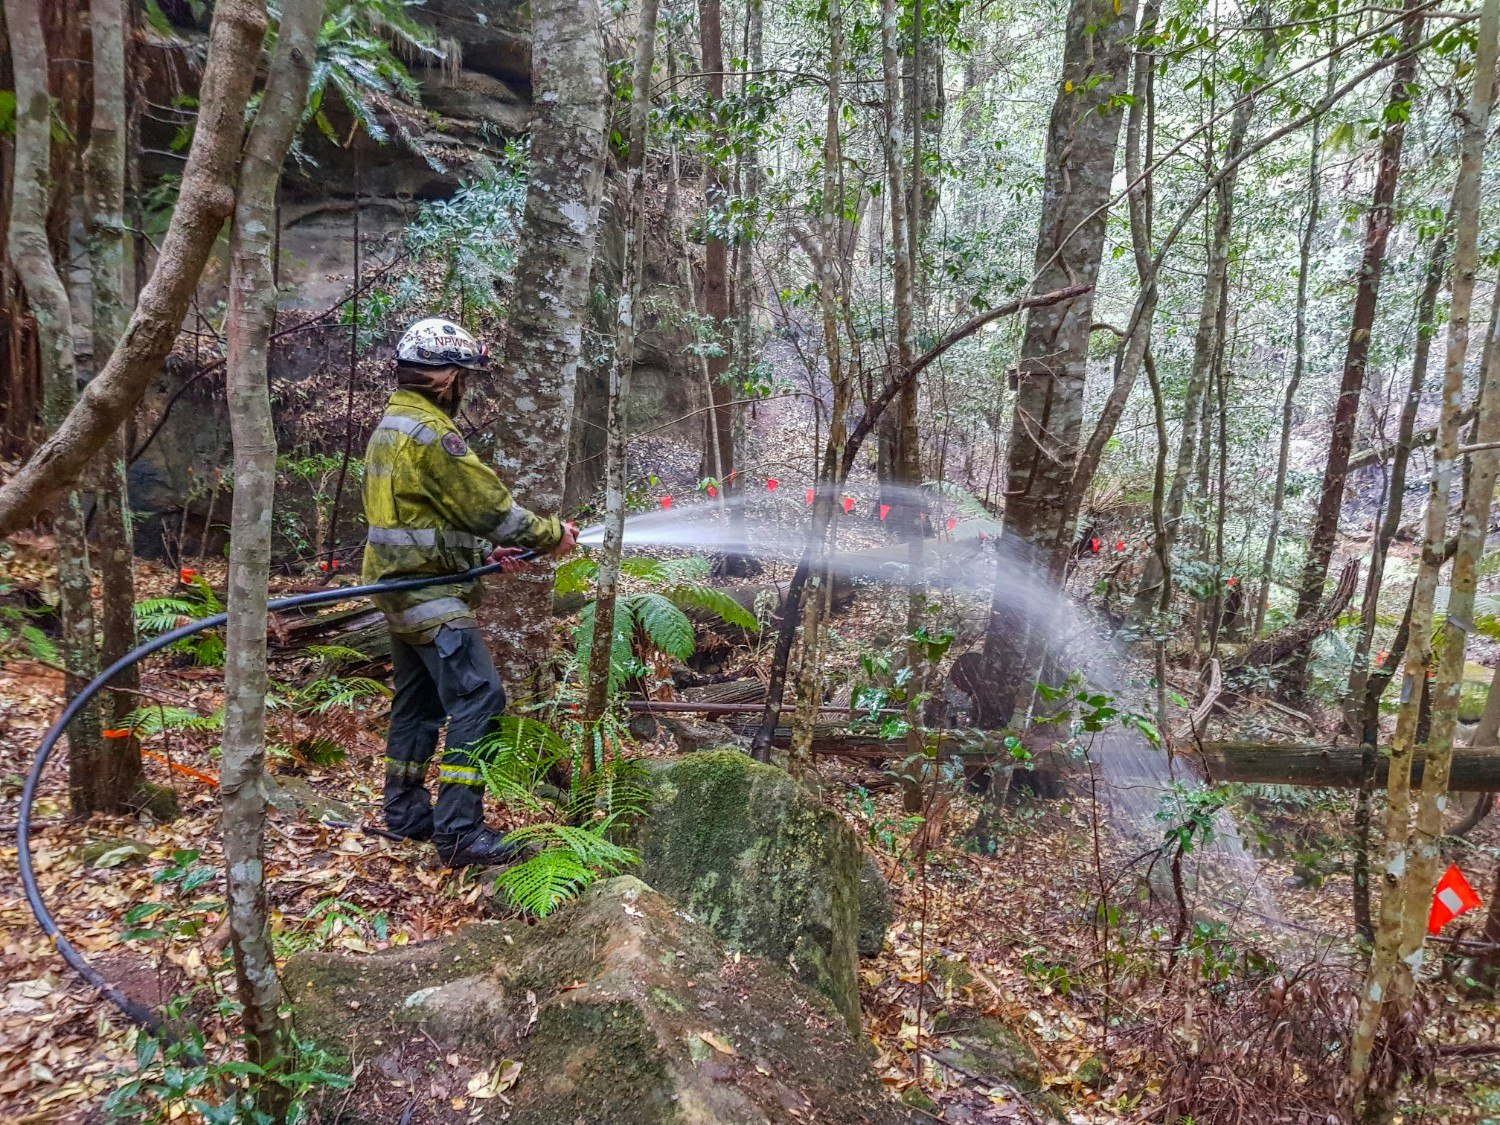 A firefighter irrigating a forest